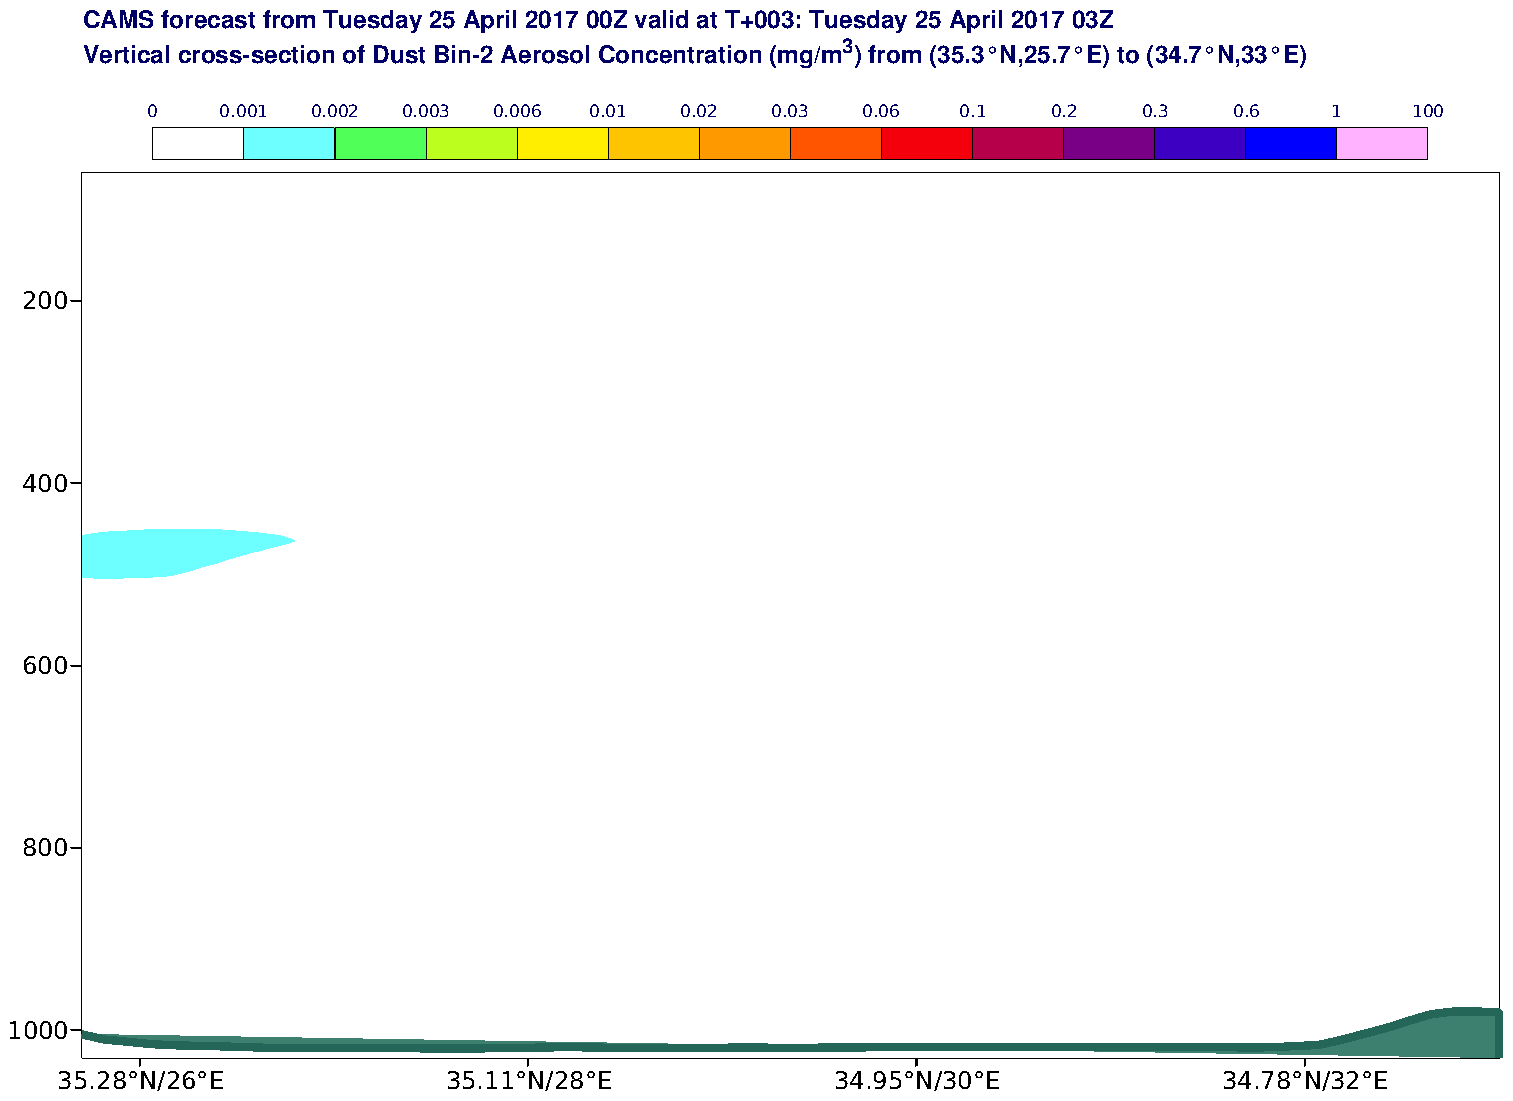 Vertical cross-section of Dust Bin-2 Aerosol Concentration (mg/m3) valid at T3 - 2017-04-25 03:00